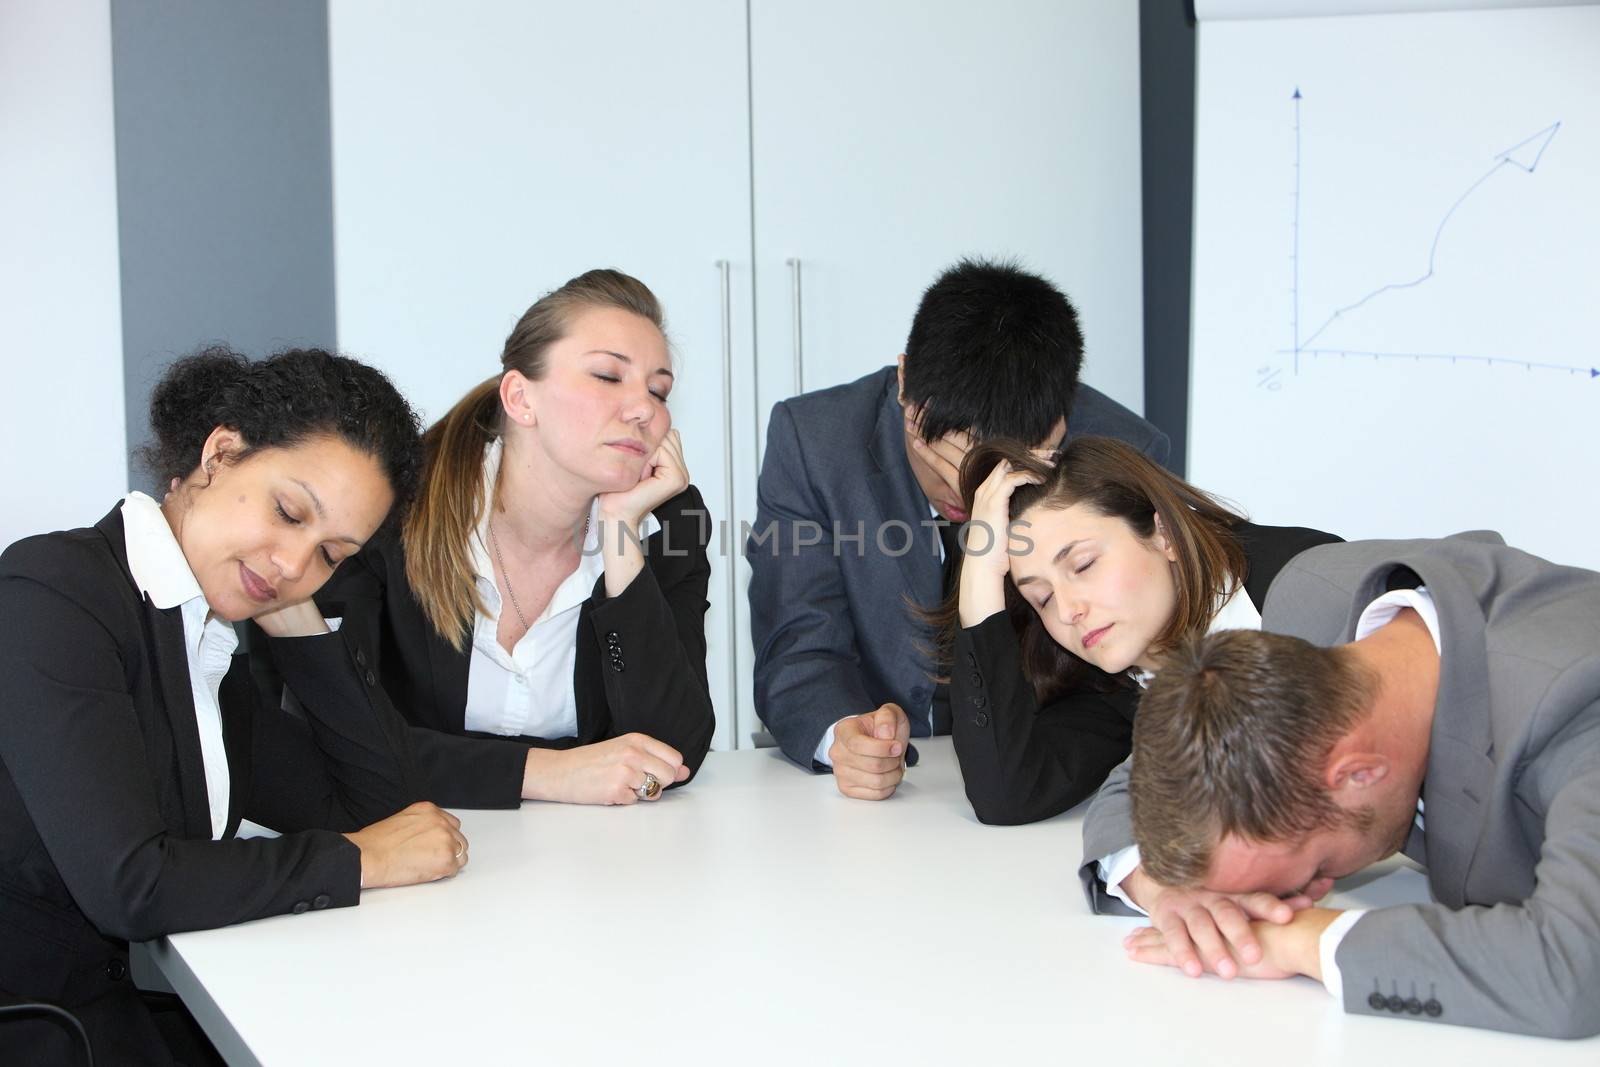 Group of diverse bored demotivated businespeople in a meeting seated at a table n the office napping with their eyes close slouching on the table